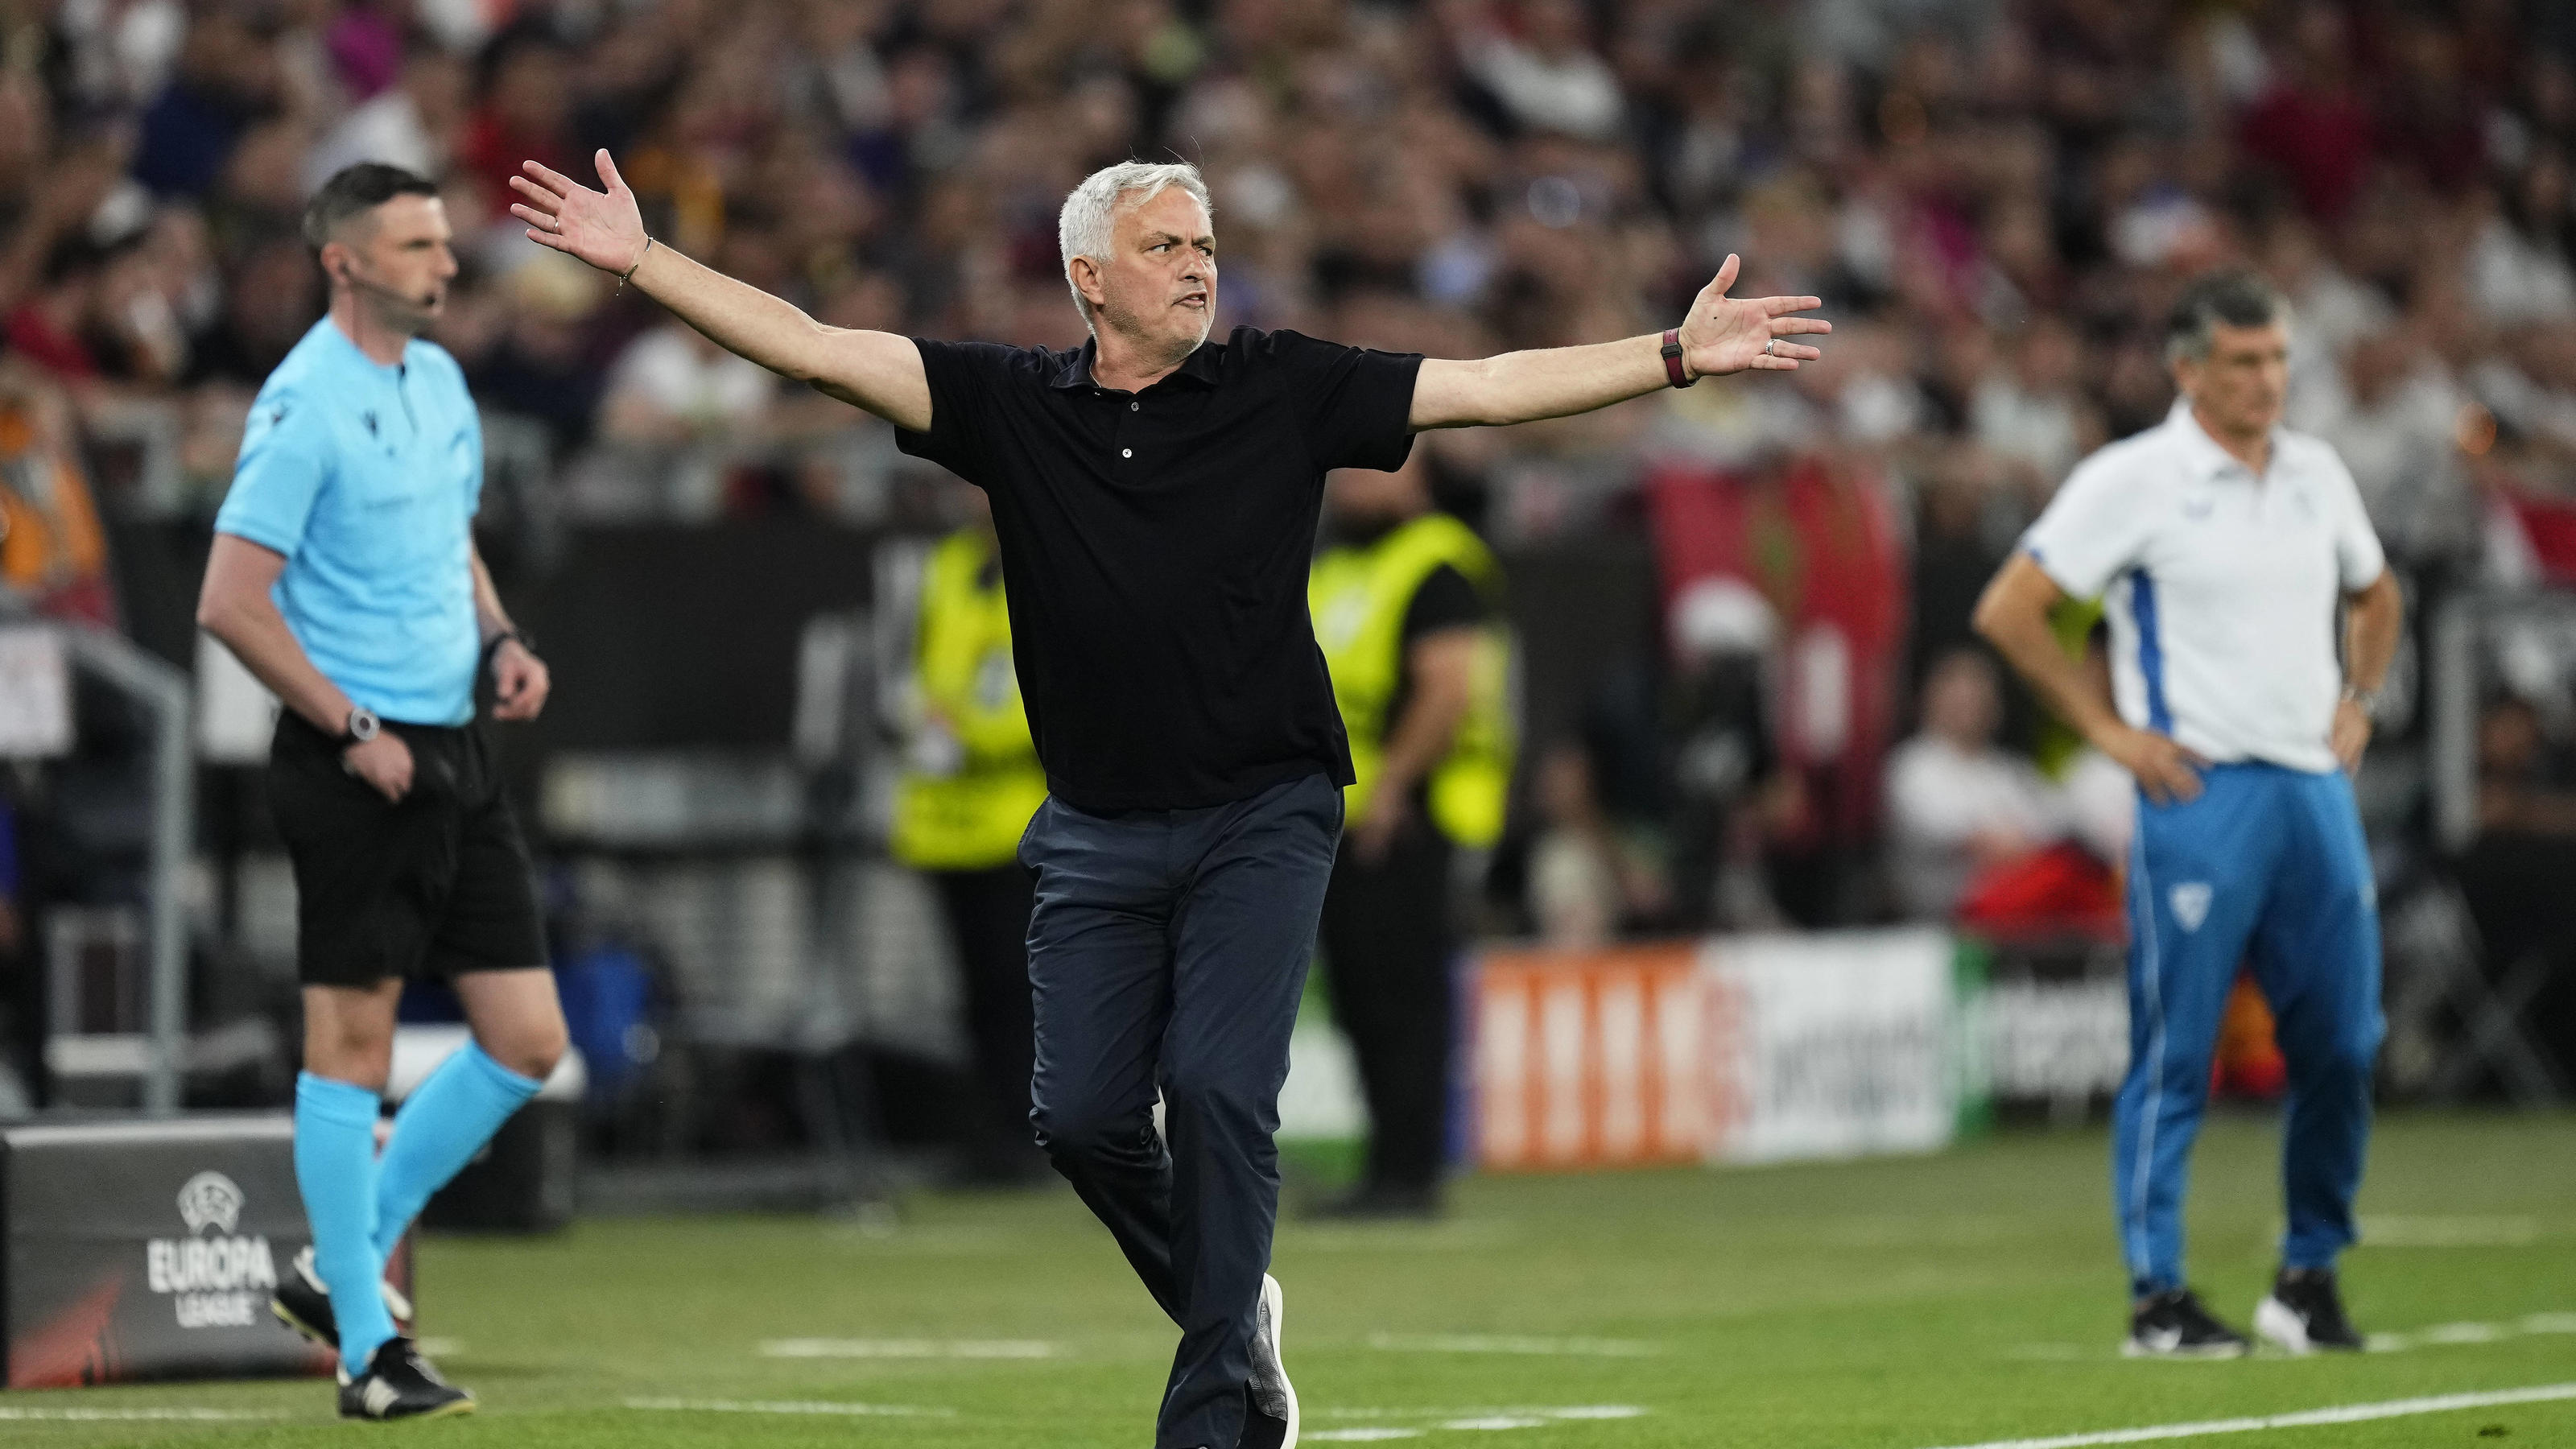 Sevilla FC v AS Roma - UEFA Europa League Final 2022/23 Jose Mourinho head coach of Roma reacts during the UEFA Europa League 2022/23 final match between Sevilla FC and AS Roma at Puskas Arena on May 31, 2023 in Budapest, Hungary. Budapest Hungary PU